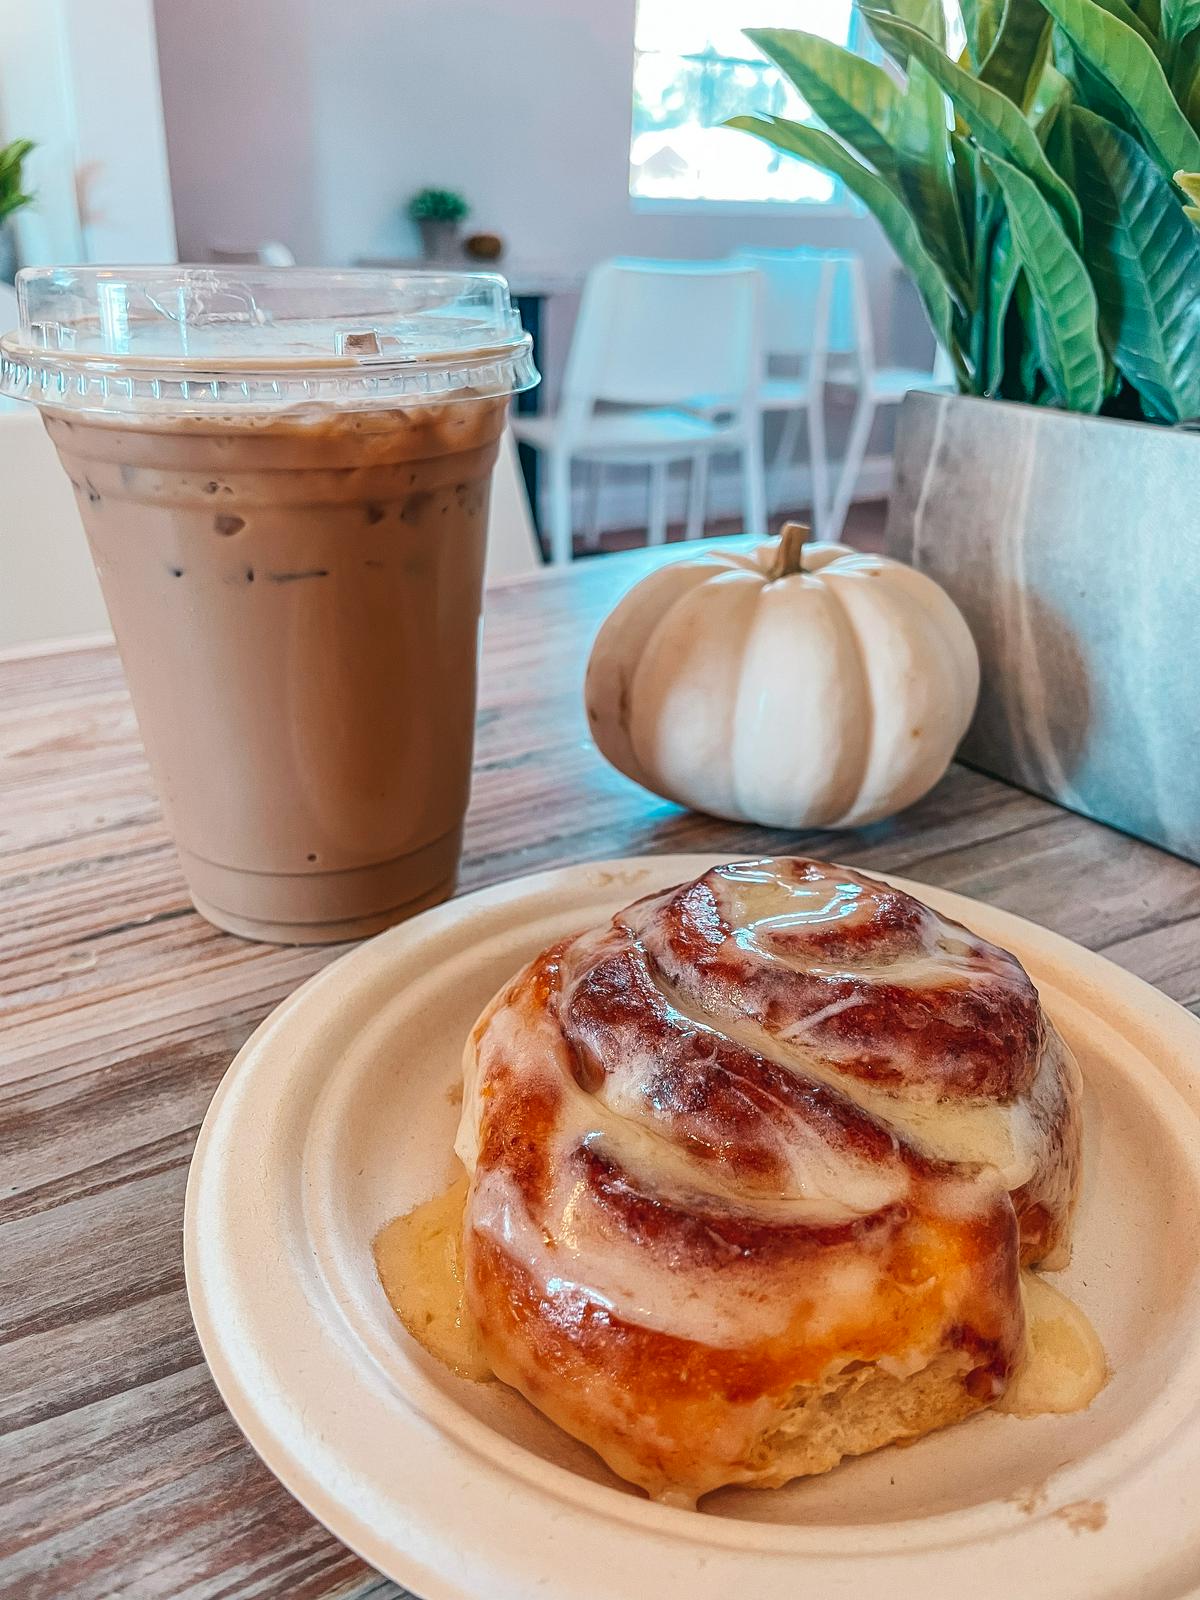 Cinnamon roll and iced latte from Lavita Bakery and Gelato in Dunedin